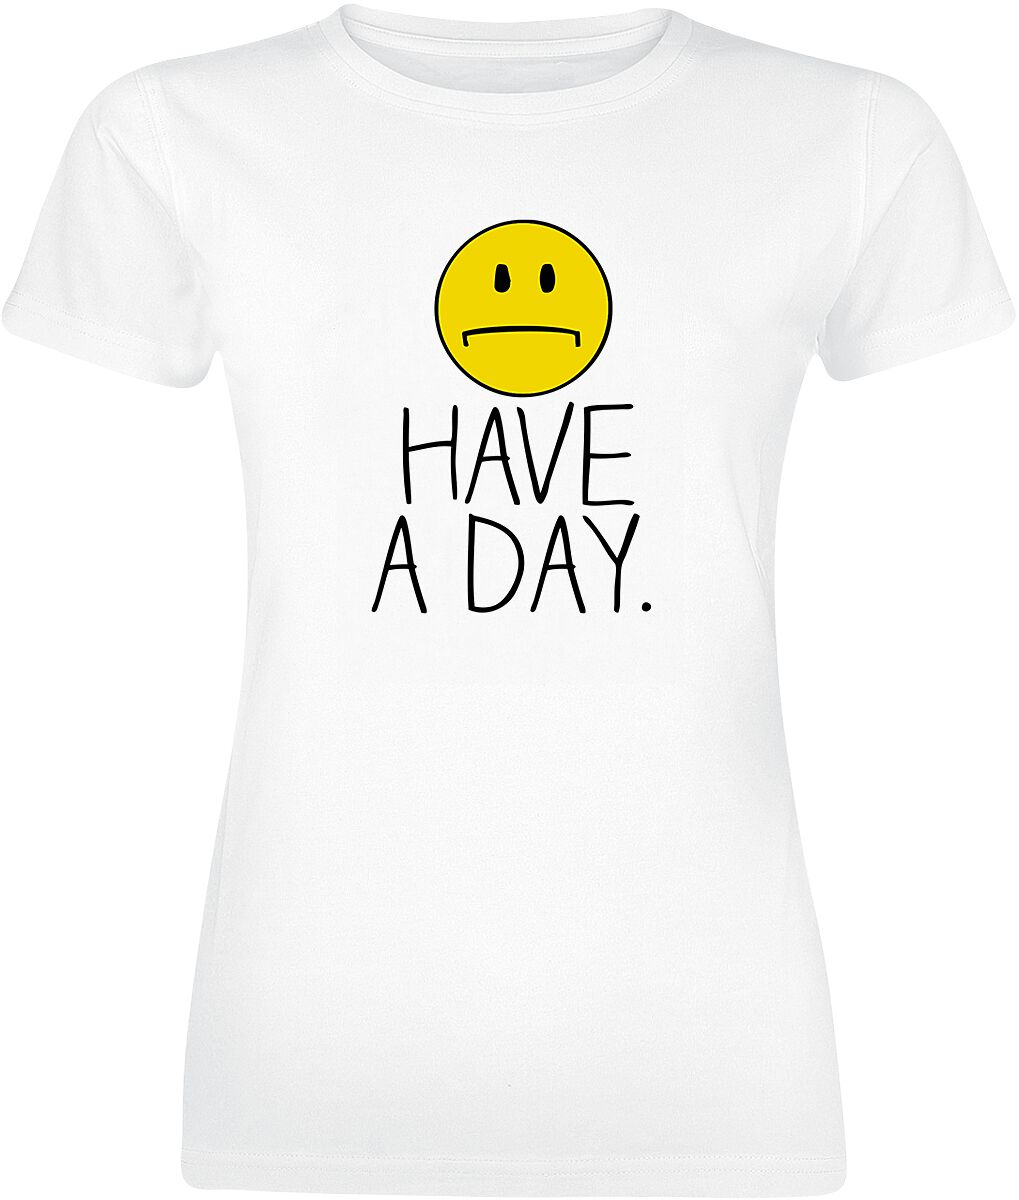 Slogans Have A Day T-Shirt white